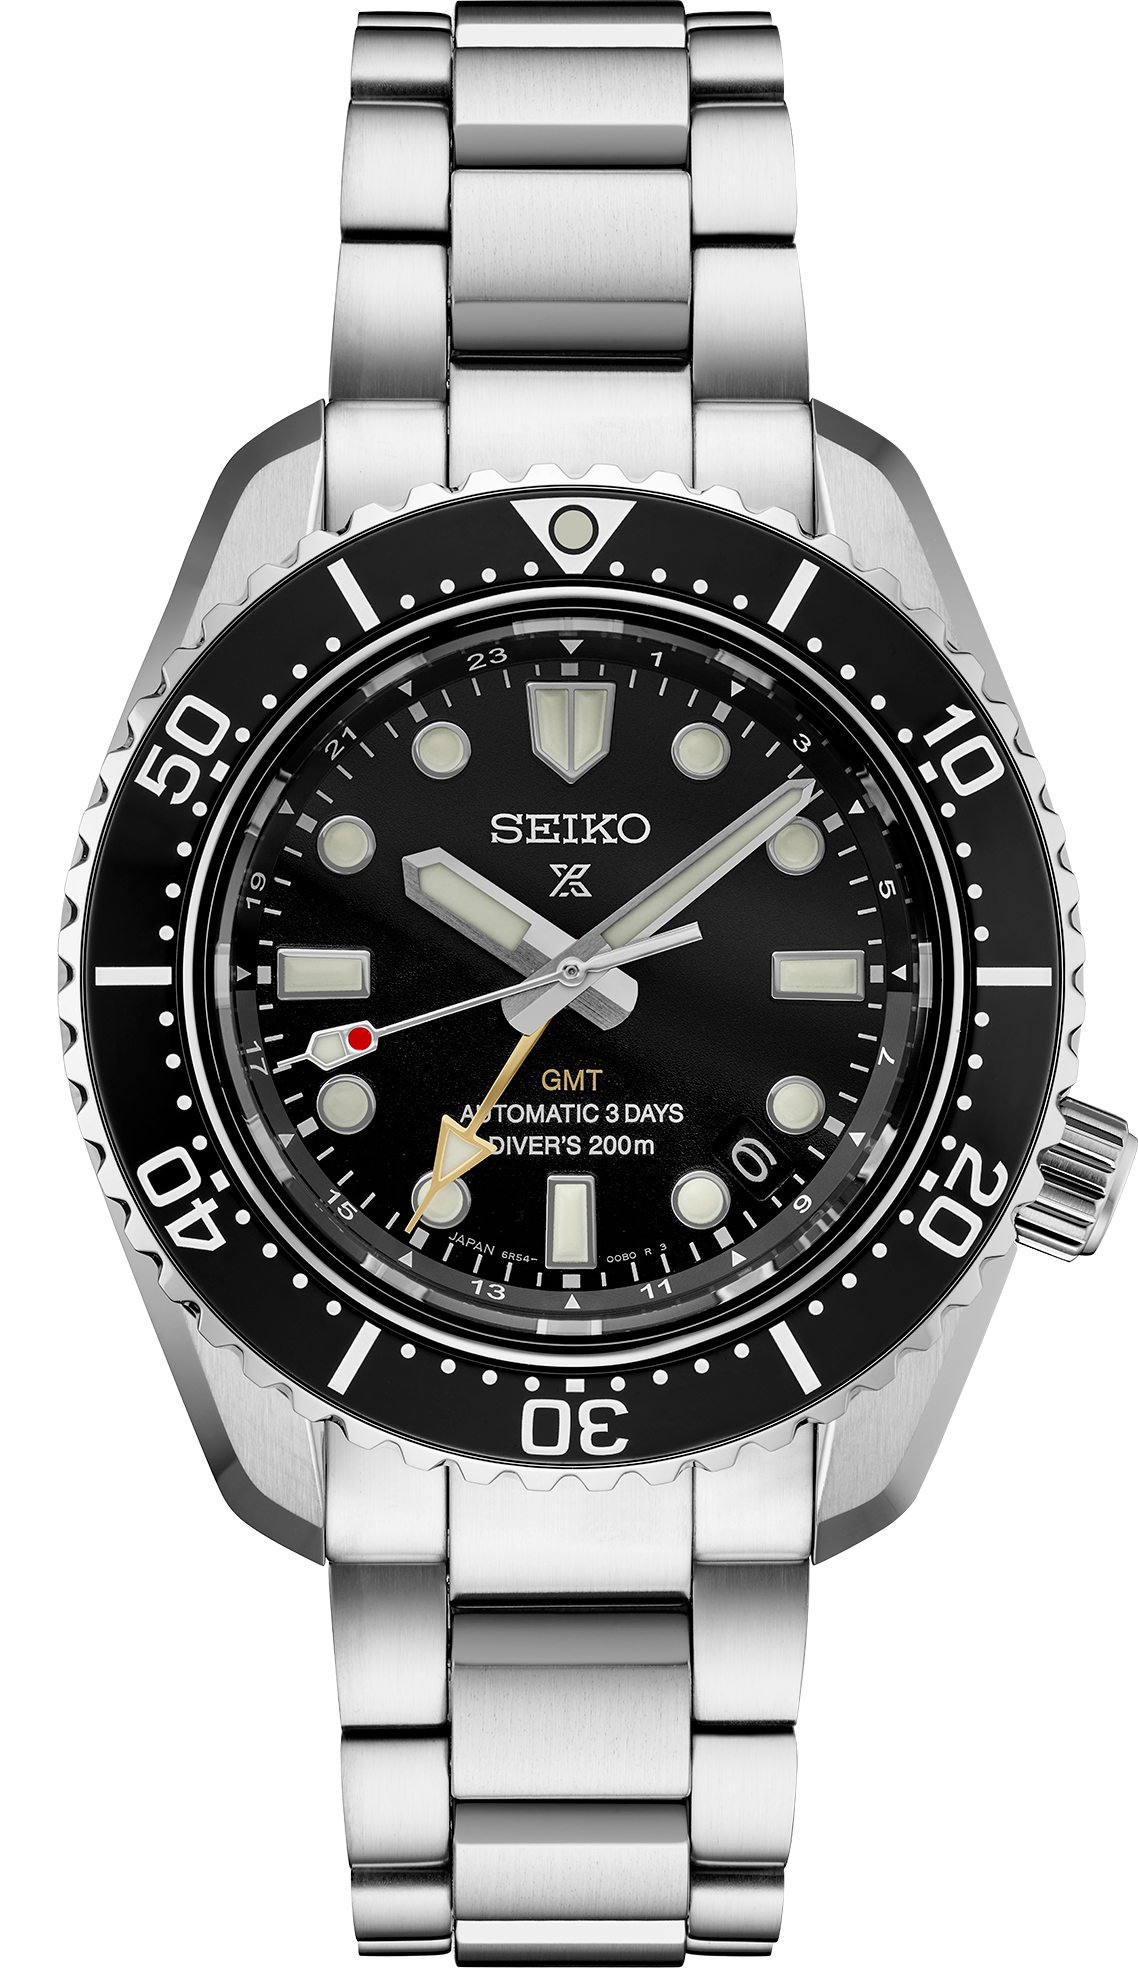 SPB383 Seiko Automatic GMT stainless steel Solder shot